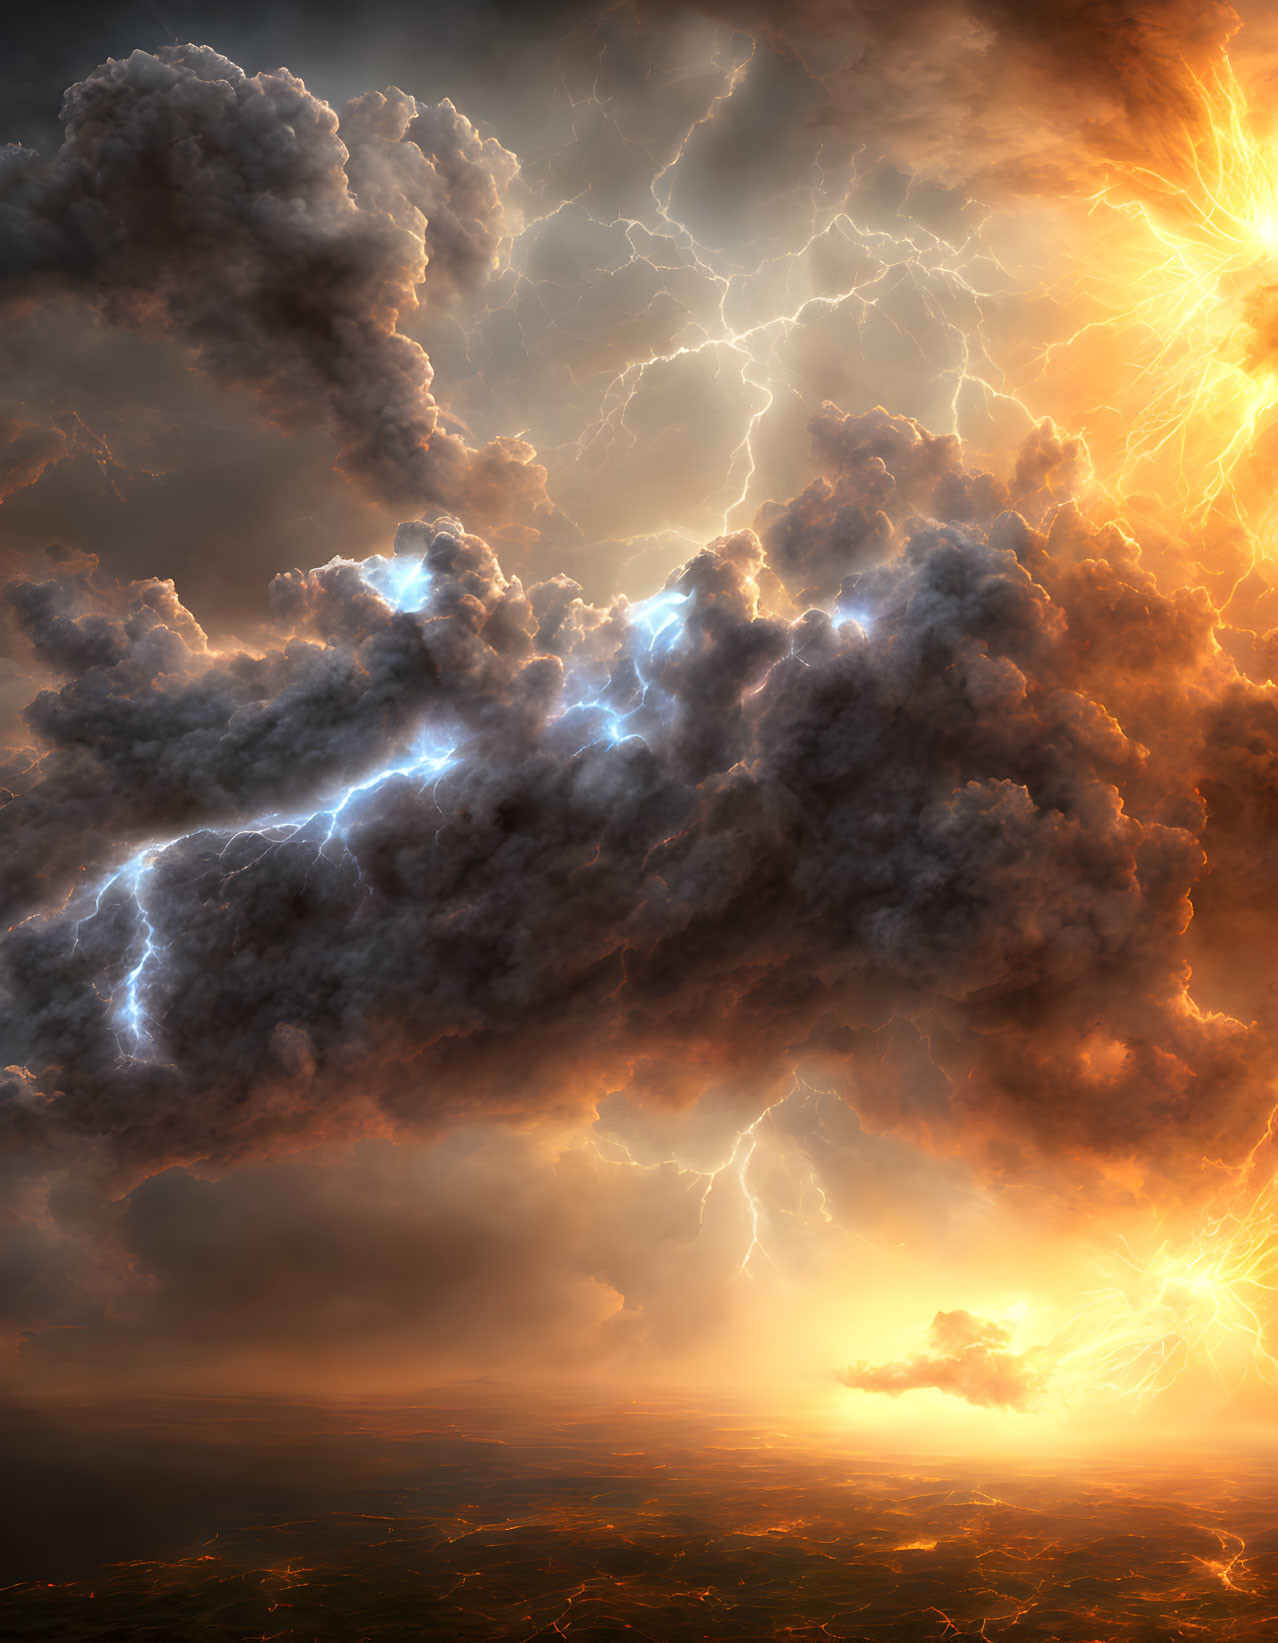 Thunderstorm scene with lightning bolts and glowing sunset landscape